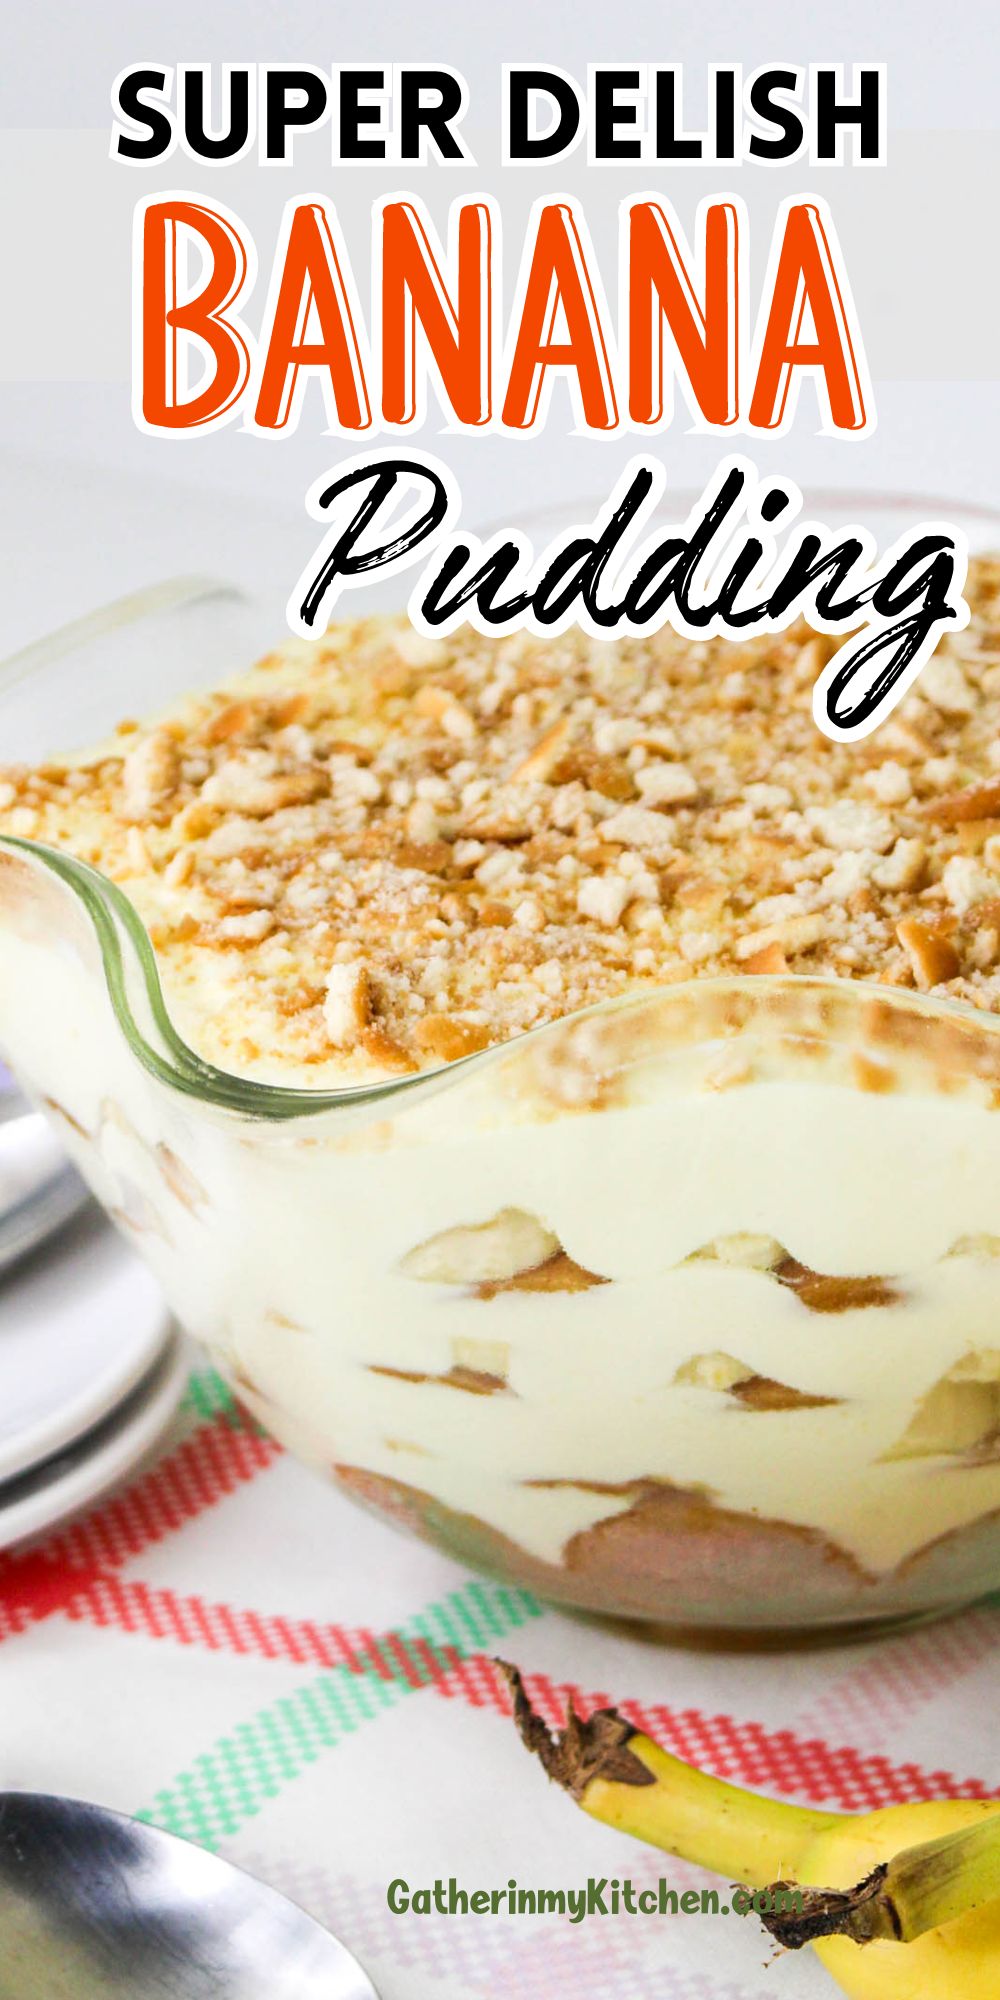 Pinterest pin: side view of banana pudding in a clear bowl with the words "Super Delish Banana Pudding" on top.